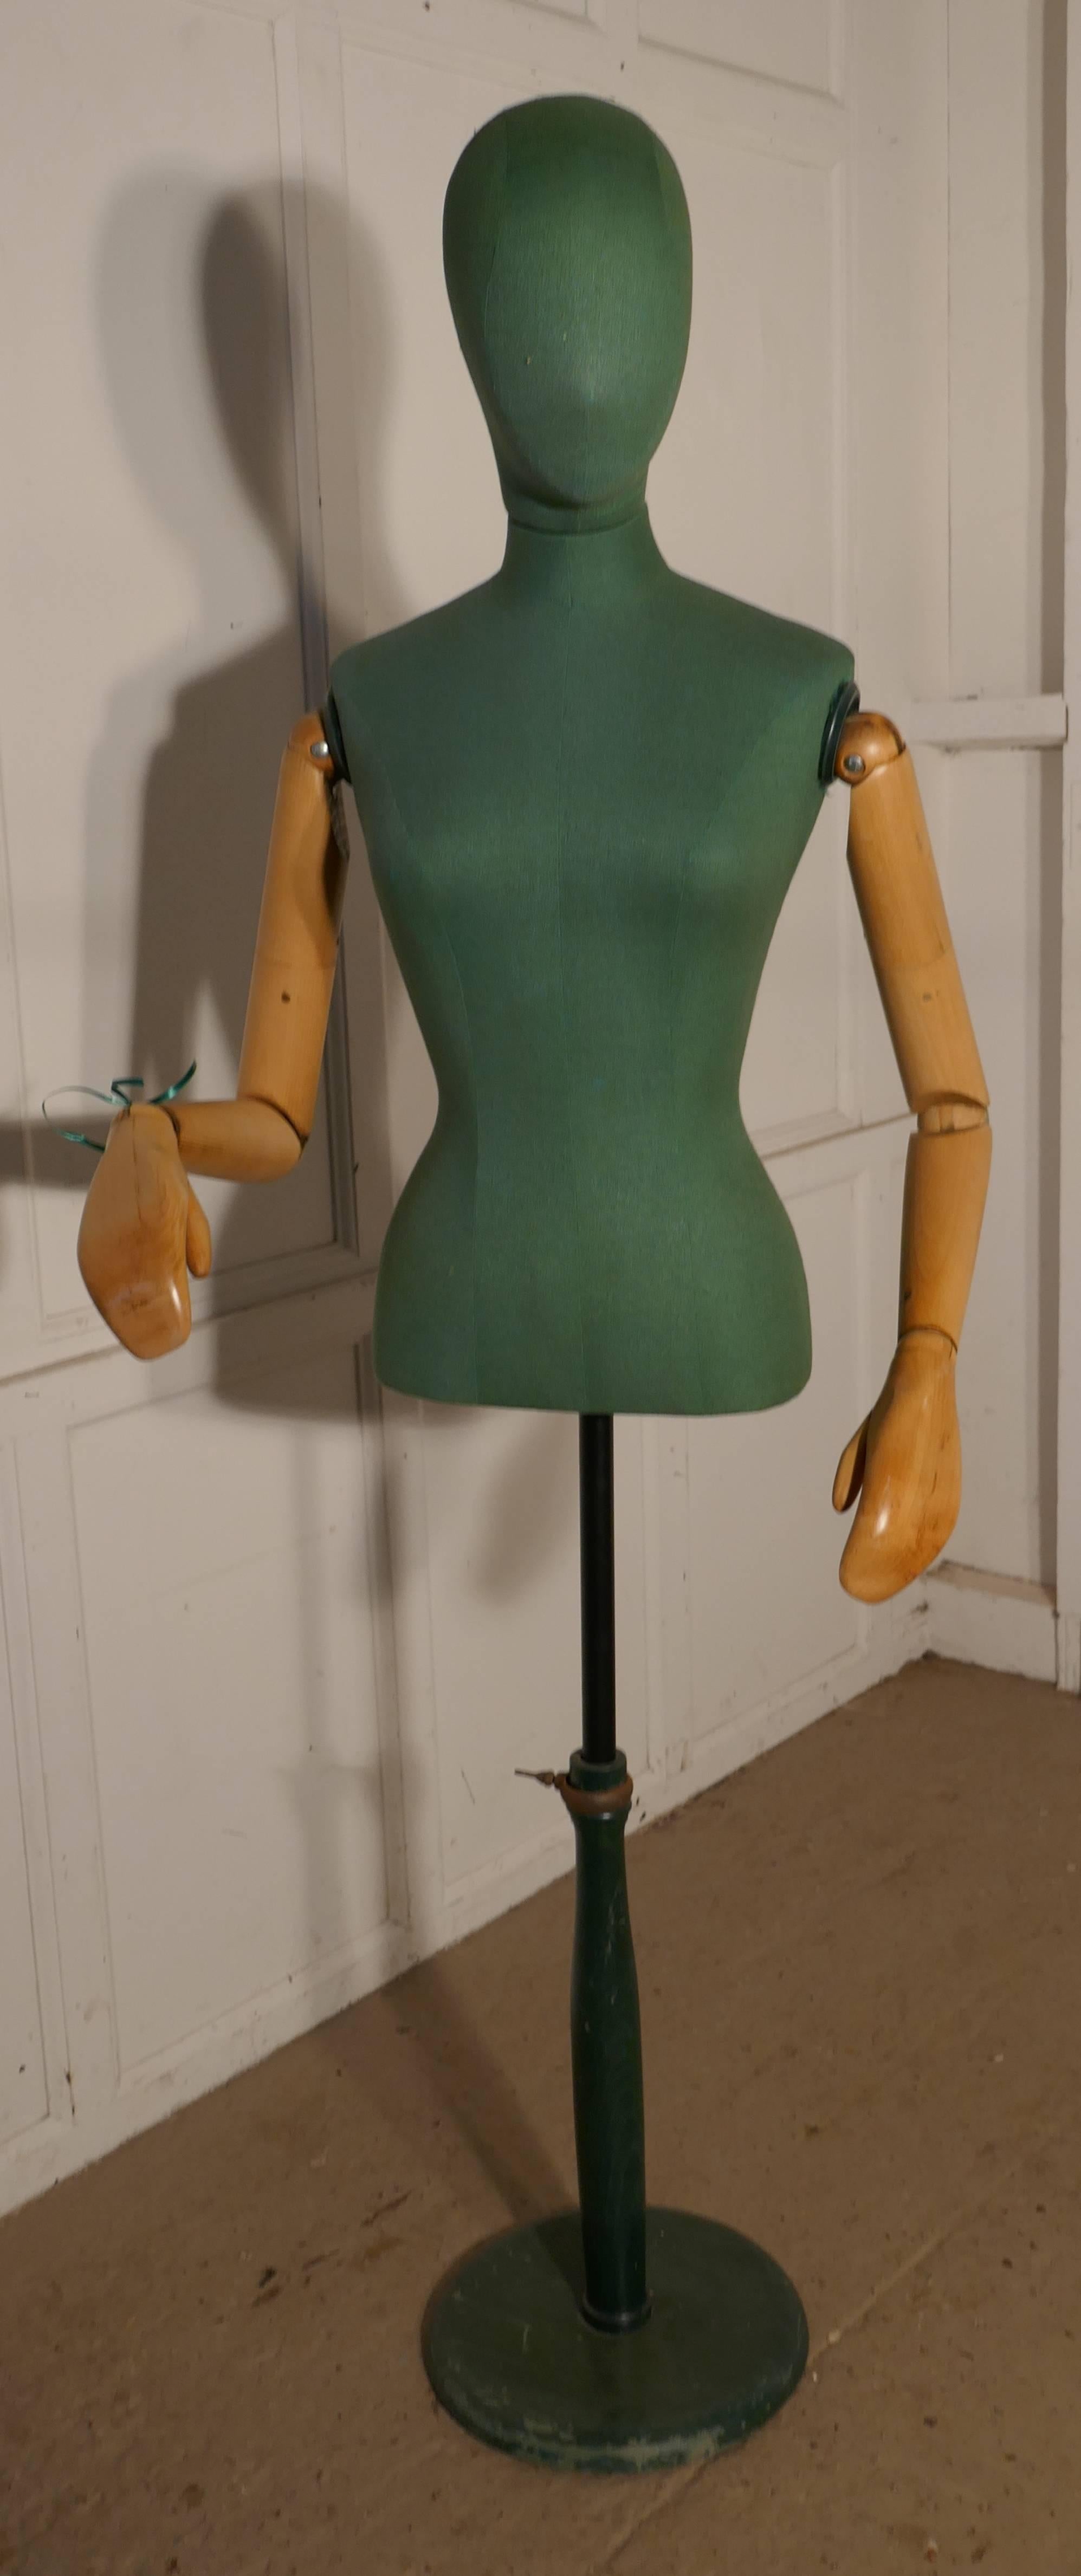 Quirky green vintage mannequin by Stockman, Taylor’s Dummy

A striking green vintage mannequin, by Stockman London & Paris, this is a good quality piece with fully articulated arms and neck. Our Quirky Taylor’s Dummy is covered fabric, she is